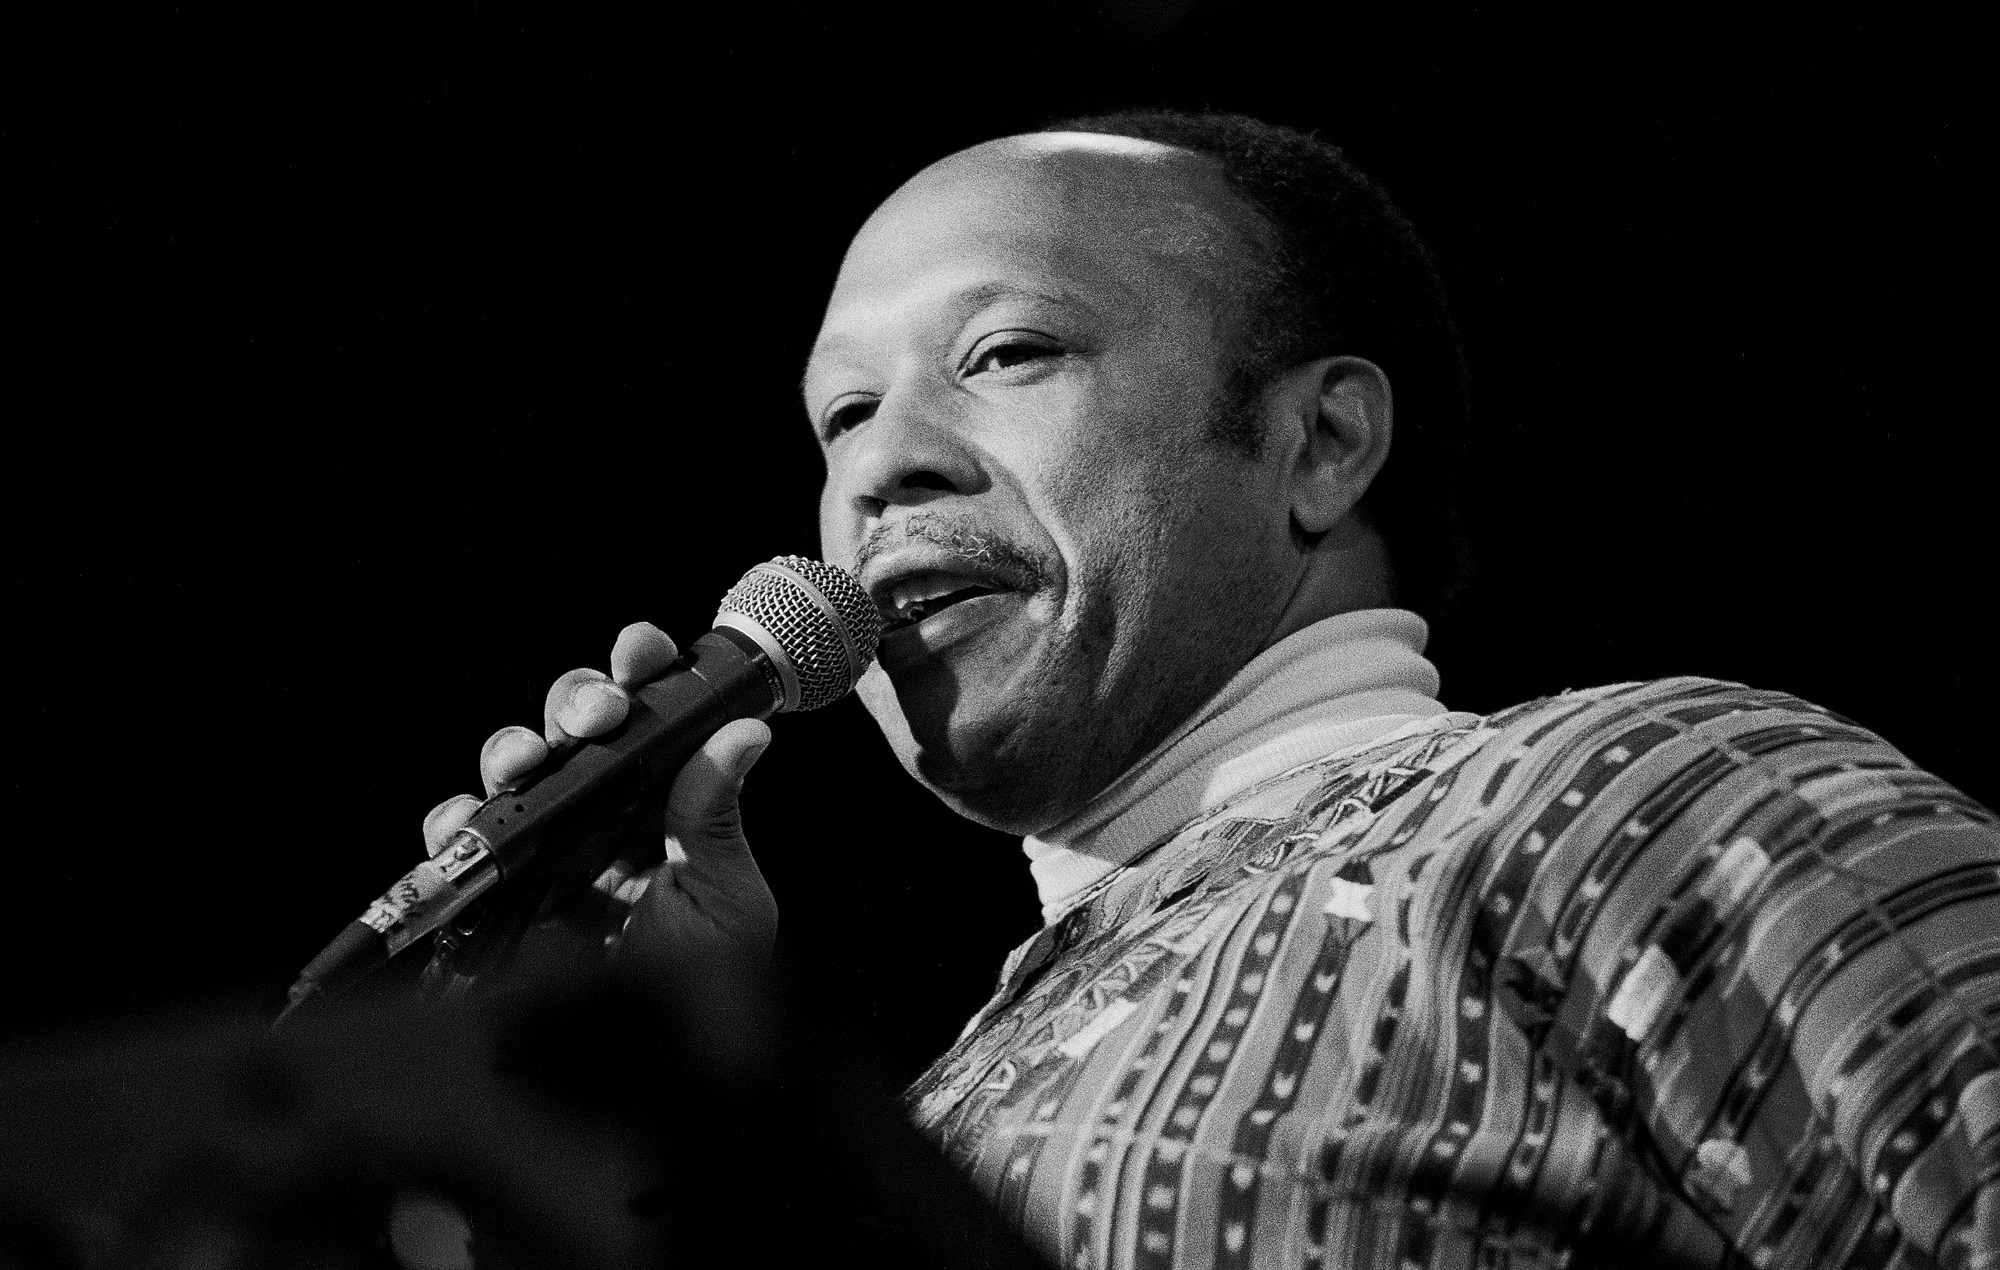 Les McCann, jazz pioneer sampled by Notorious B.I.G., Snoop Dogg and Dr. Dre, has died